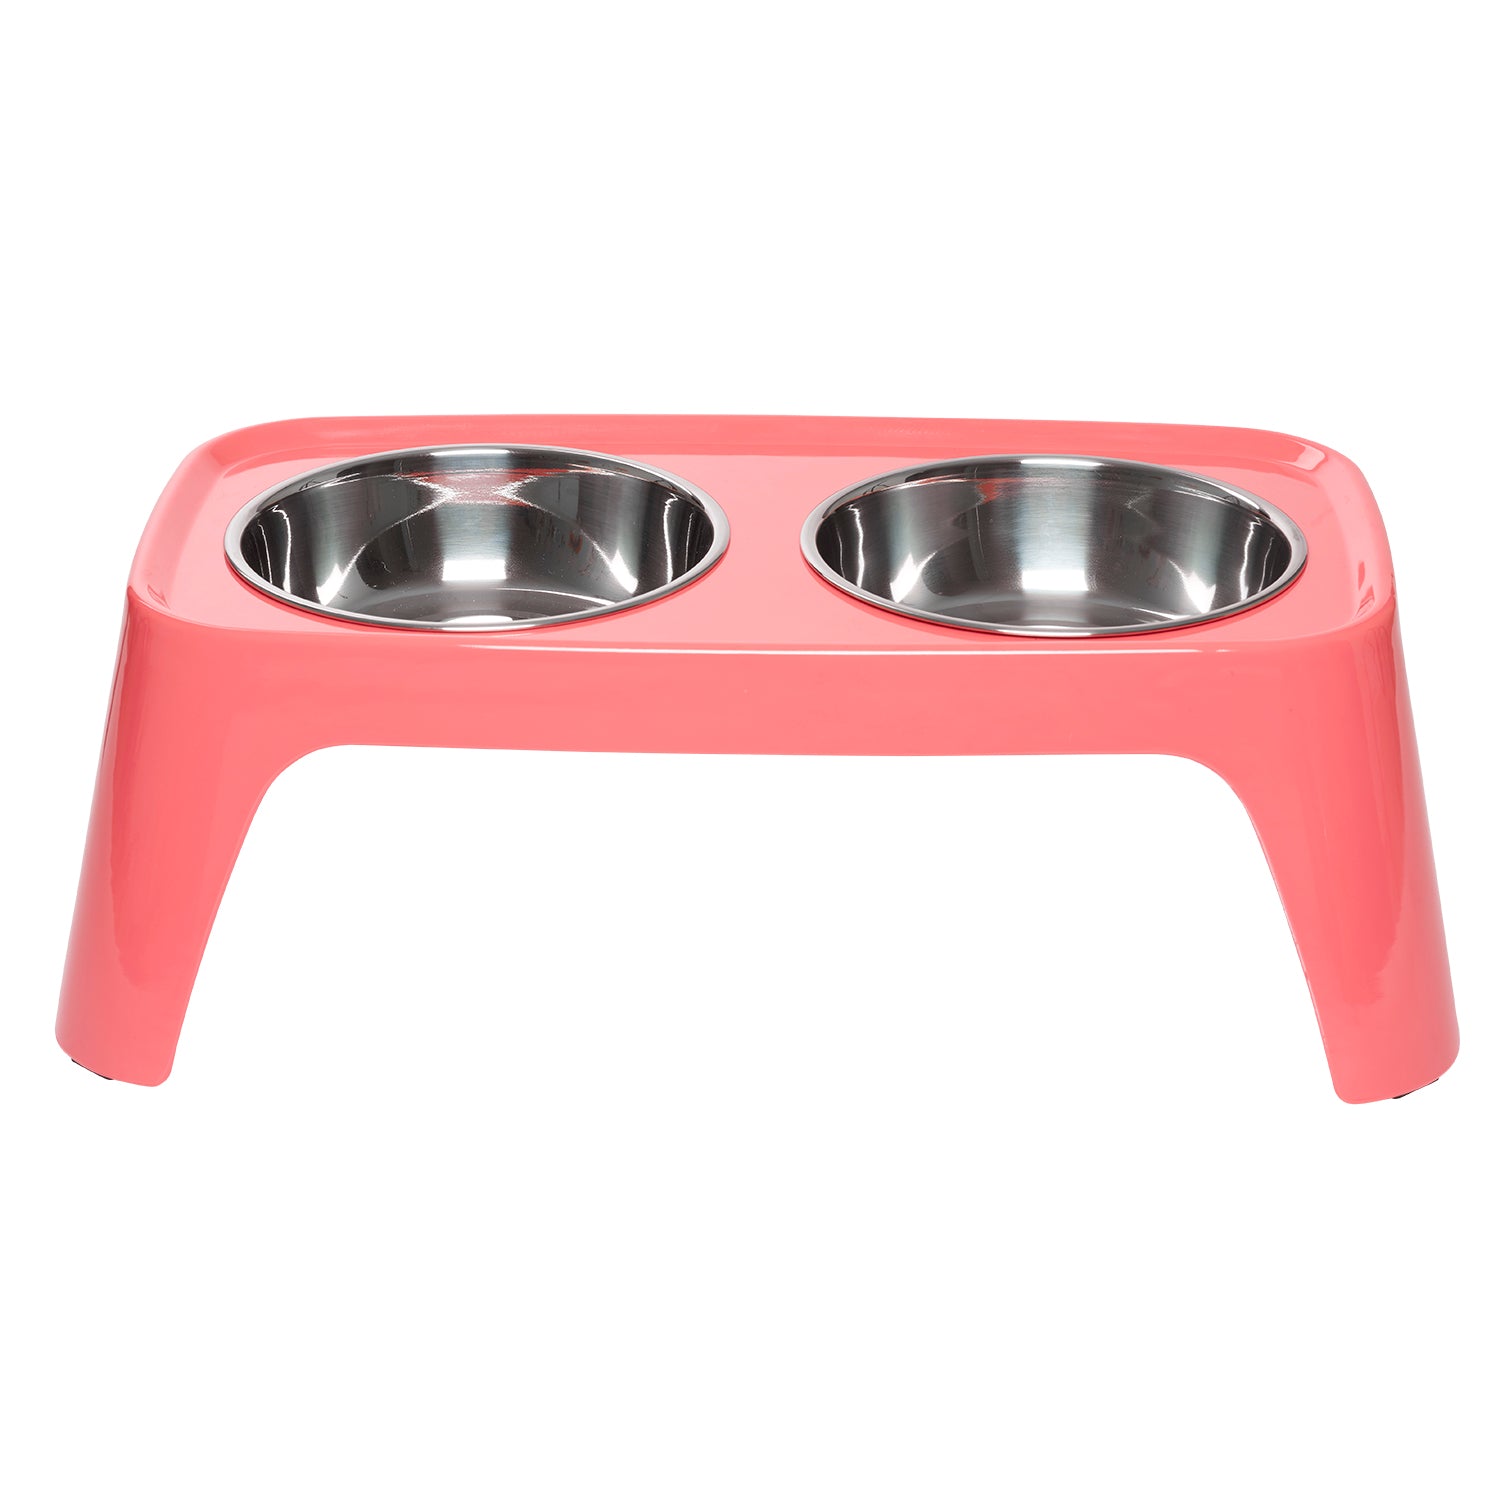 Elevated Dog Feeder | 4.4 inches tall | Totally Pooched – MessyMutts